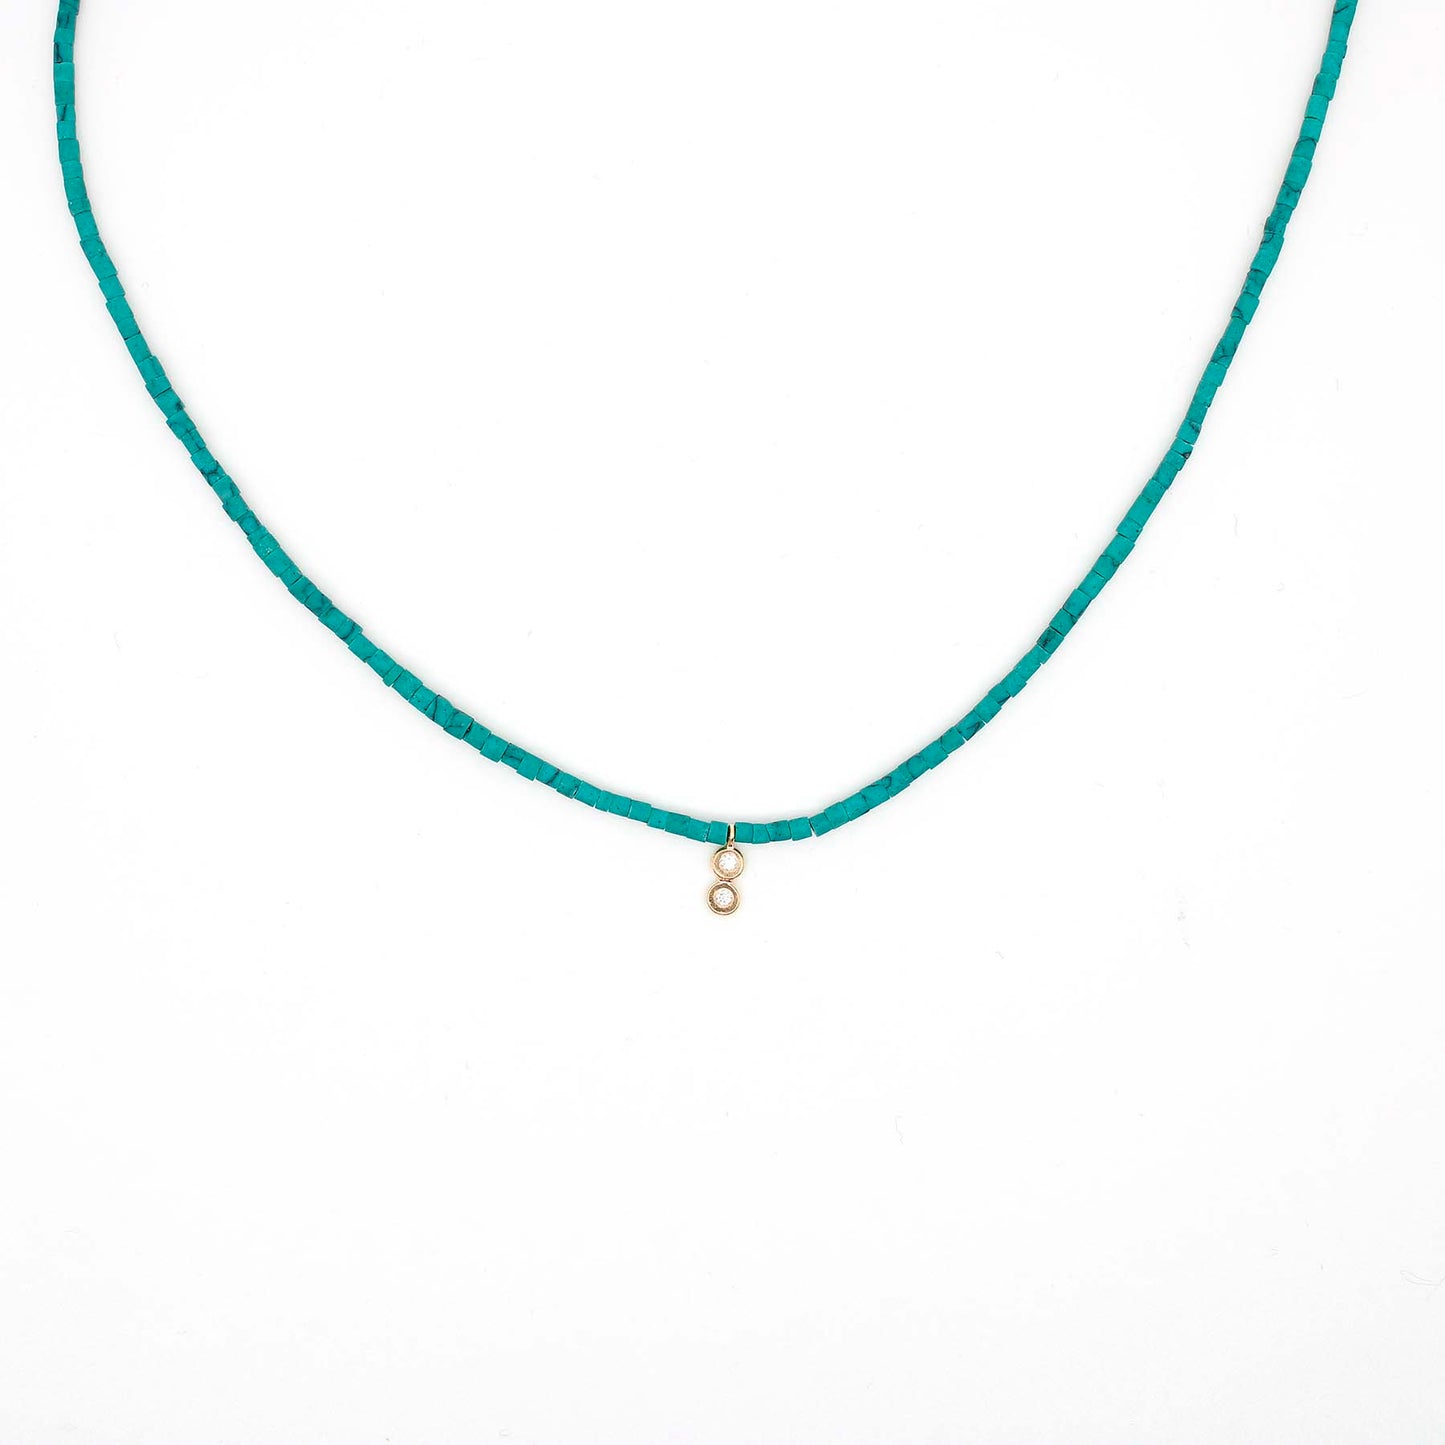 Beaded Necklace with Green Turquoise and Diamond in 18k Gold Setting